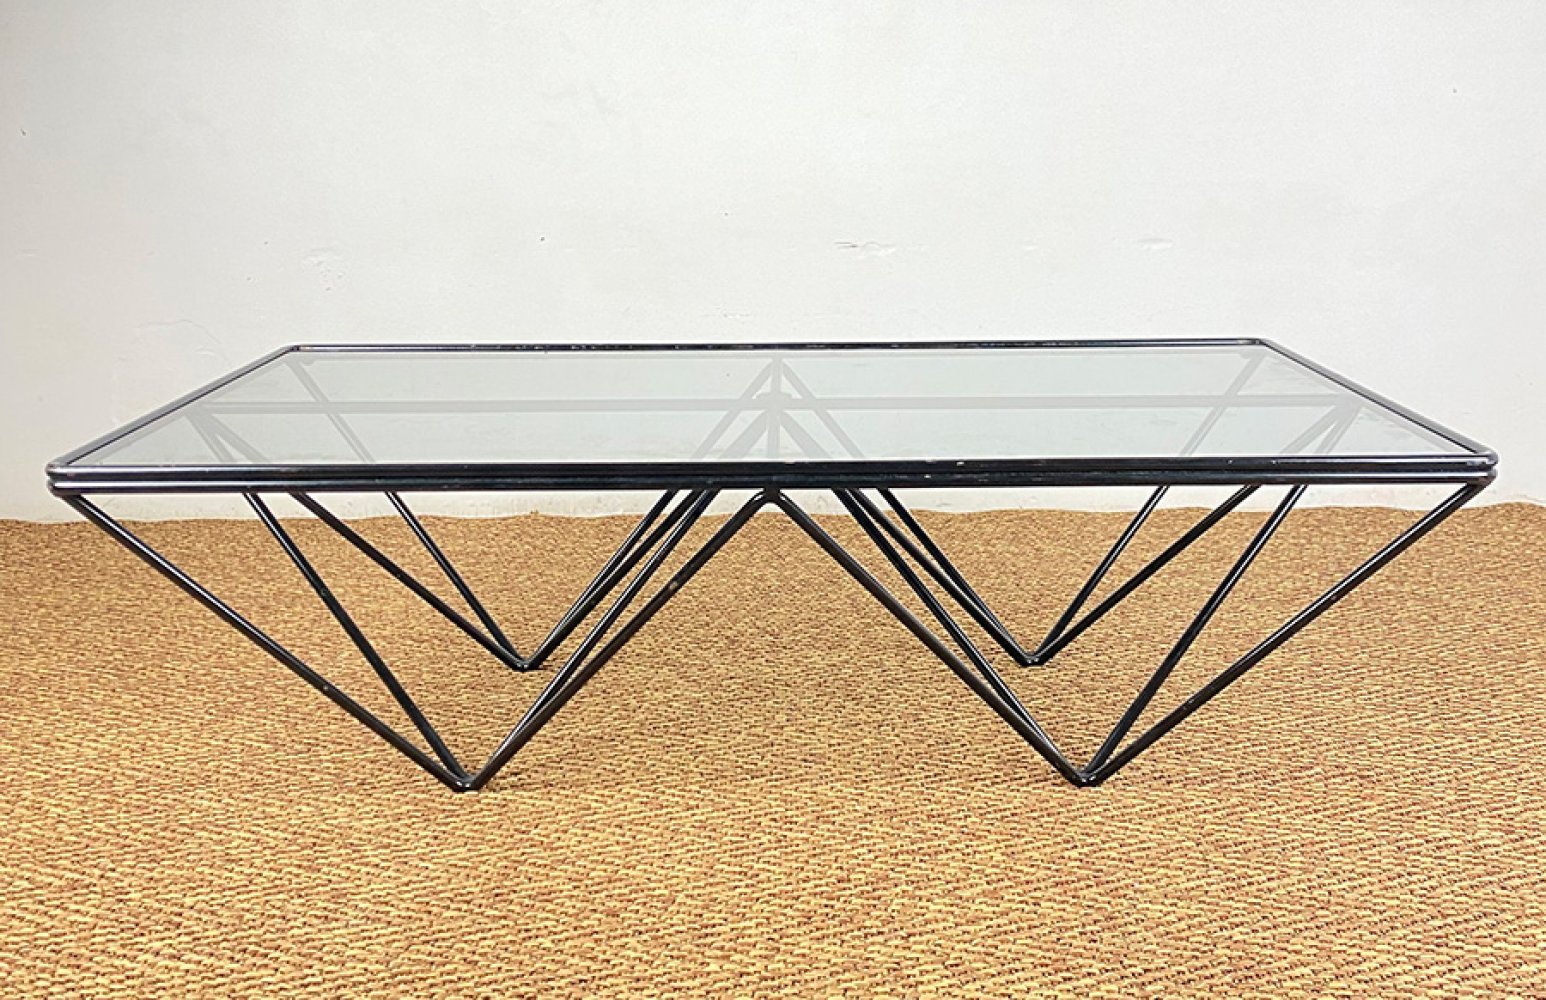 Contributed to PAOLO PIVA, (Adria, Italy, 1950 - Vienna, 2017).Coffee table "Alanda", 1970s.Producer - Image 4 of 7